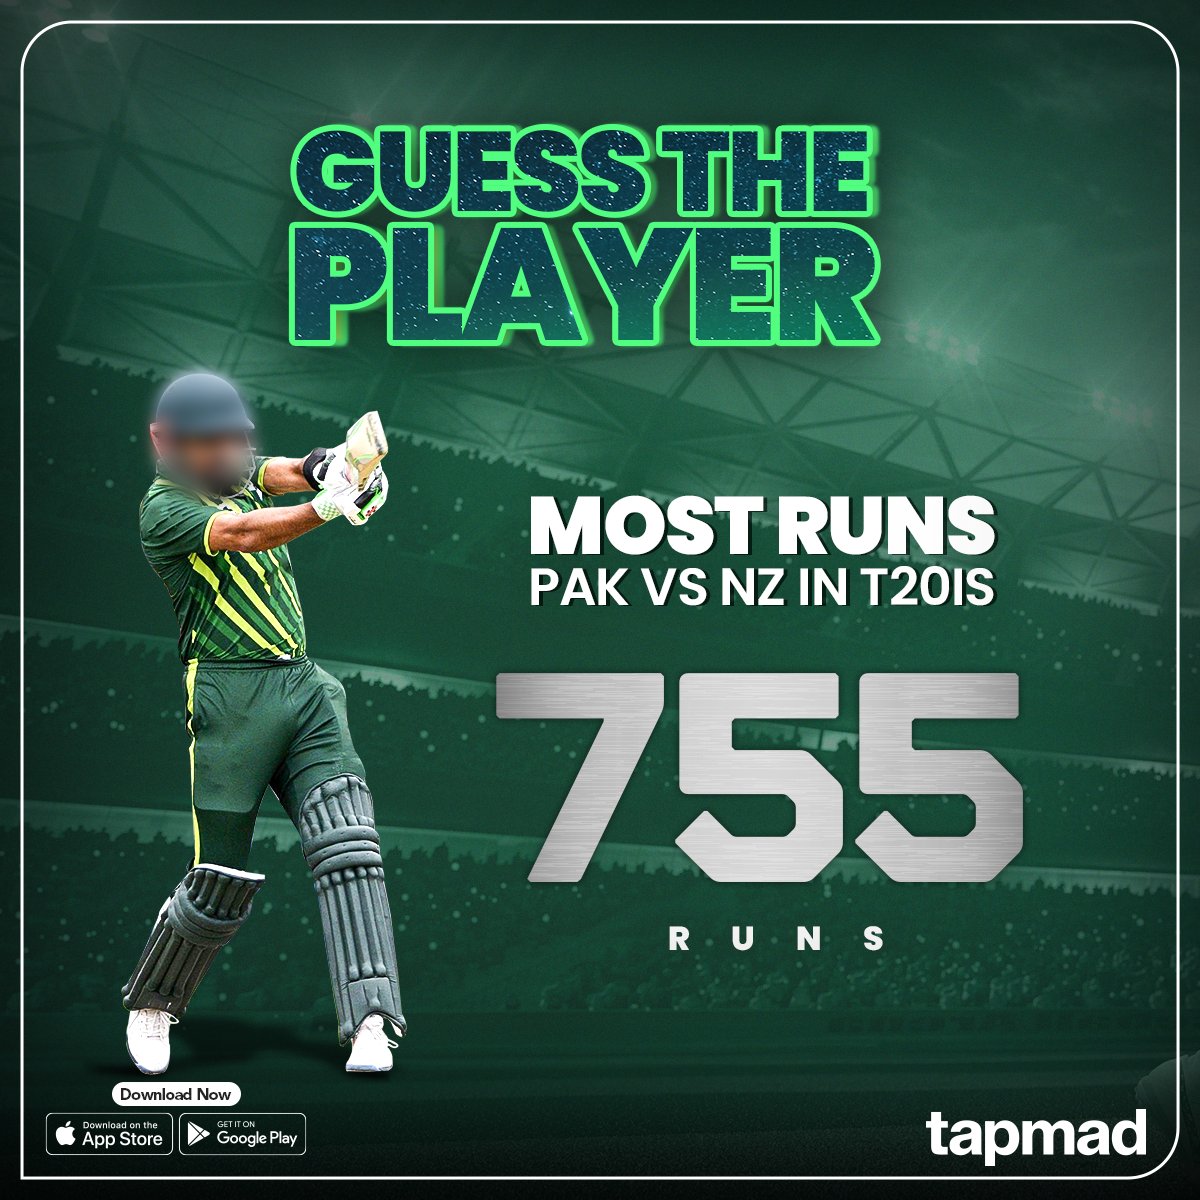 Hours away from the series opener⏳Can you name the batsman who’s topped the charts in PAK vs NZ T20 clashes?🤔 #PAKvNZ | #tapmad